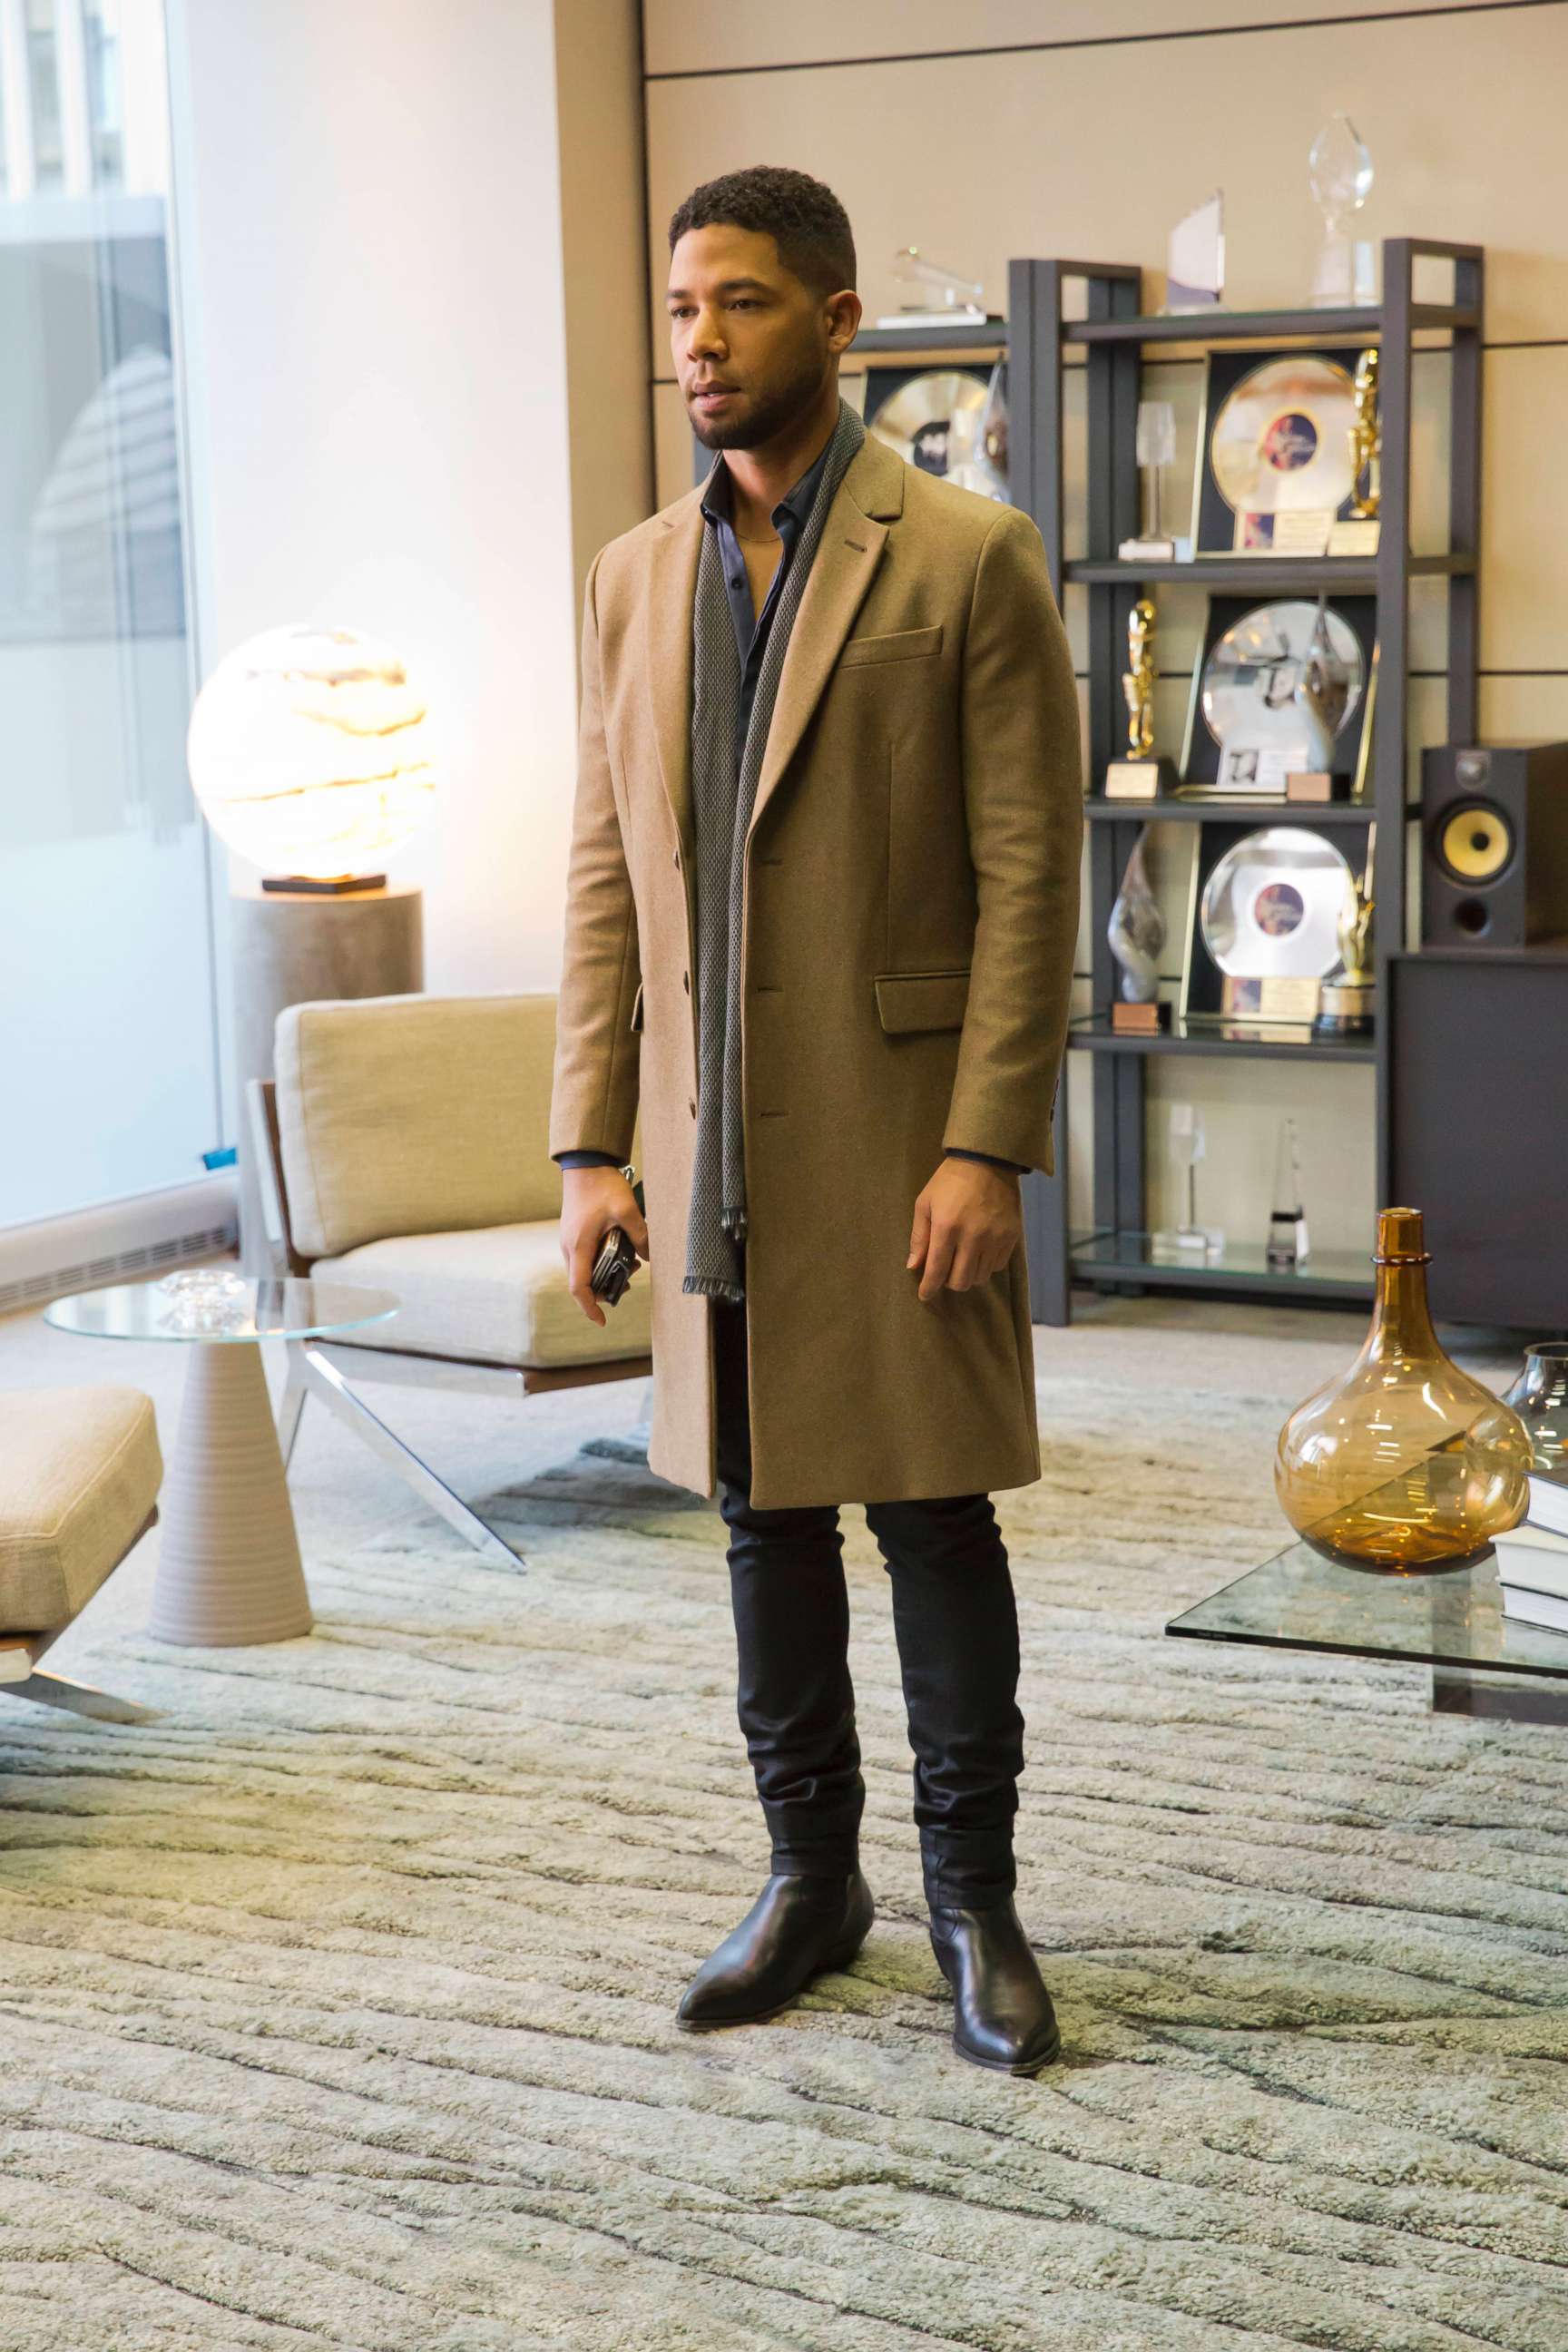 PHOTO: Jussie Smollett in the "A Rose By Any Other Name" episode of "Empire."